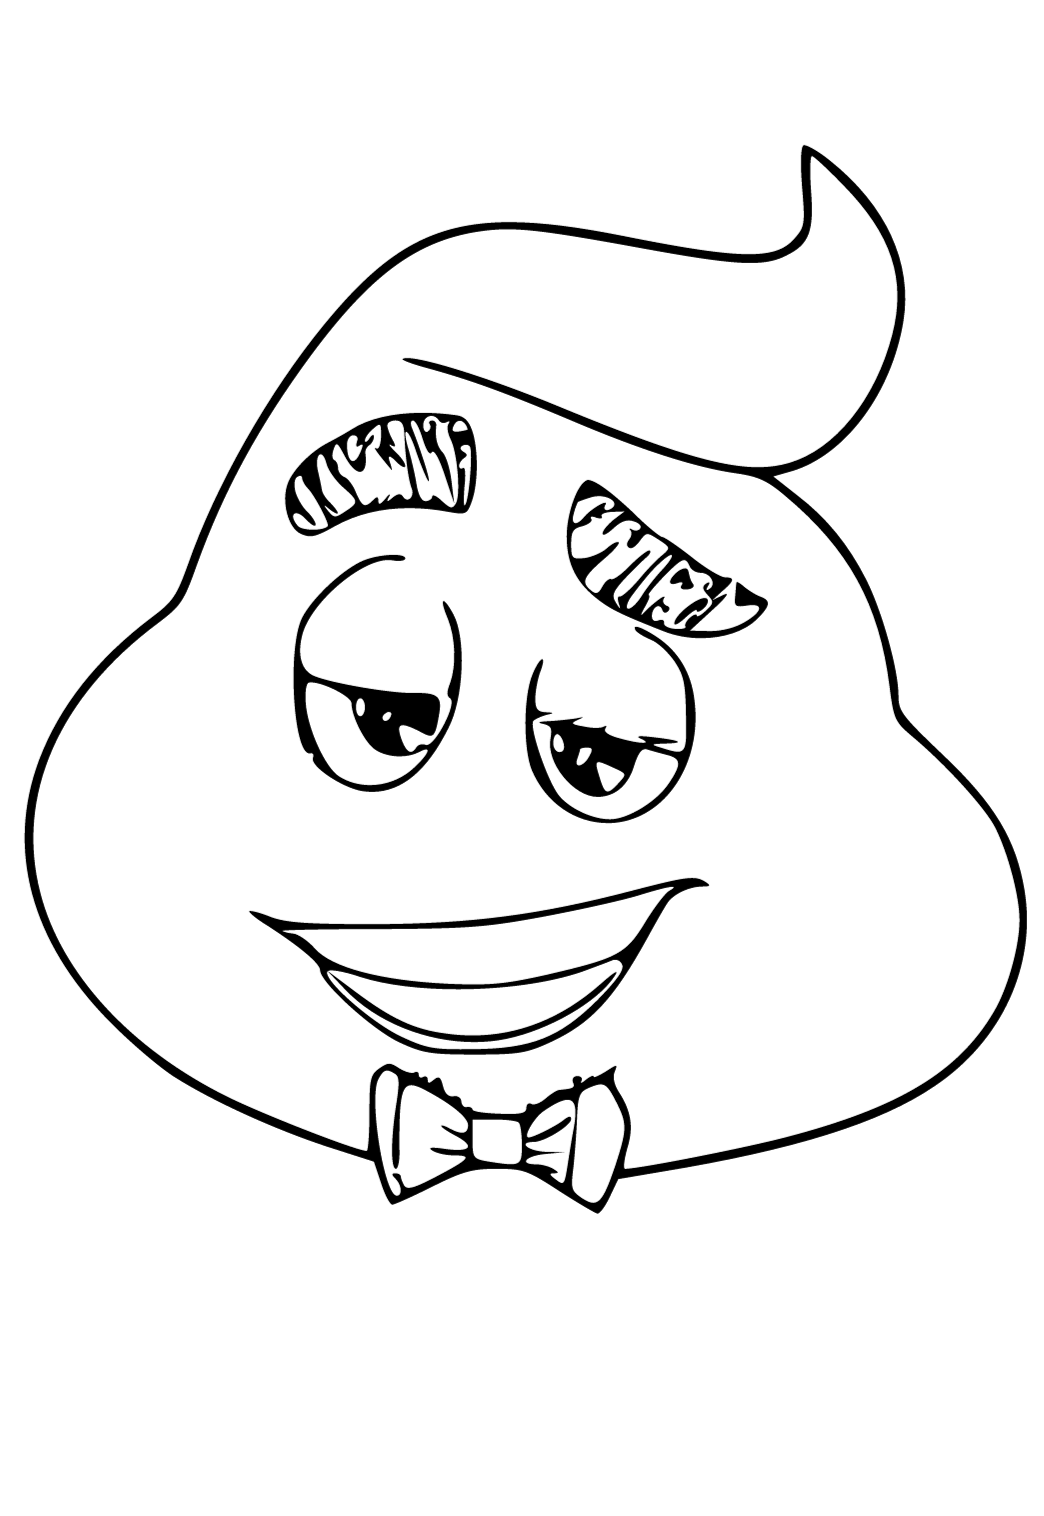 Free printable poop stylish coloring page for adults and kids